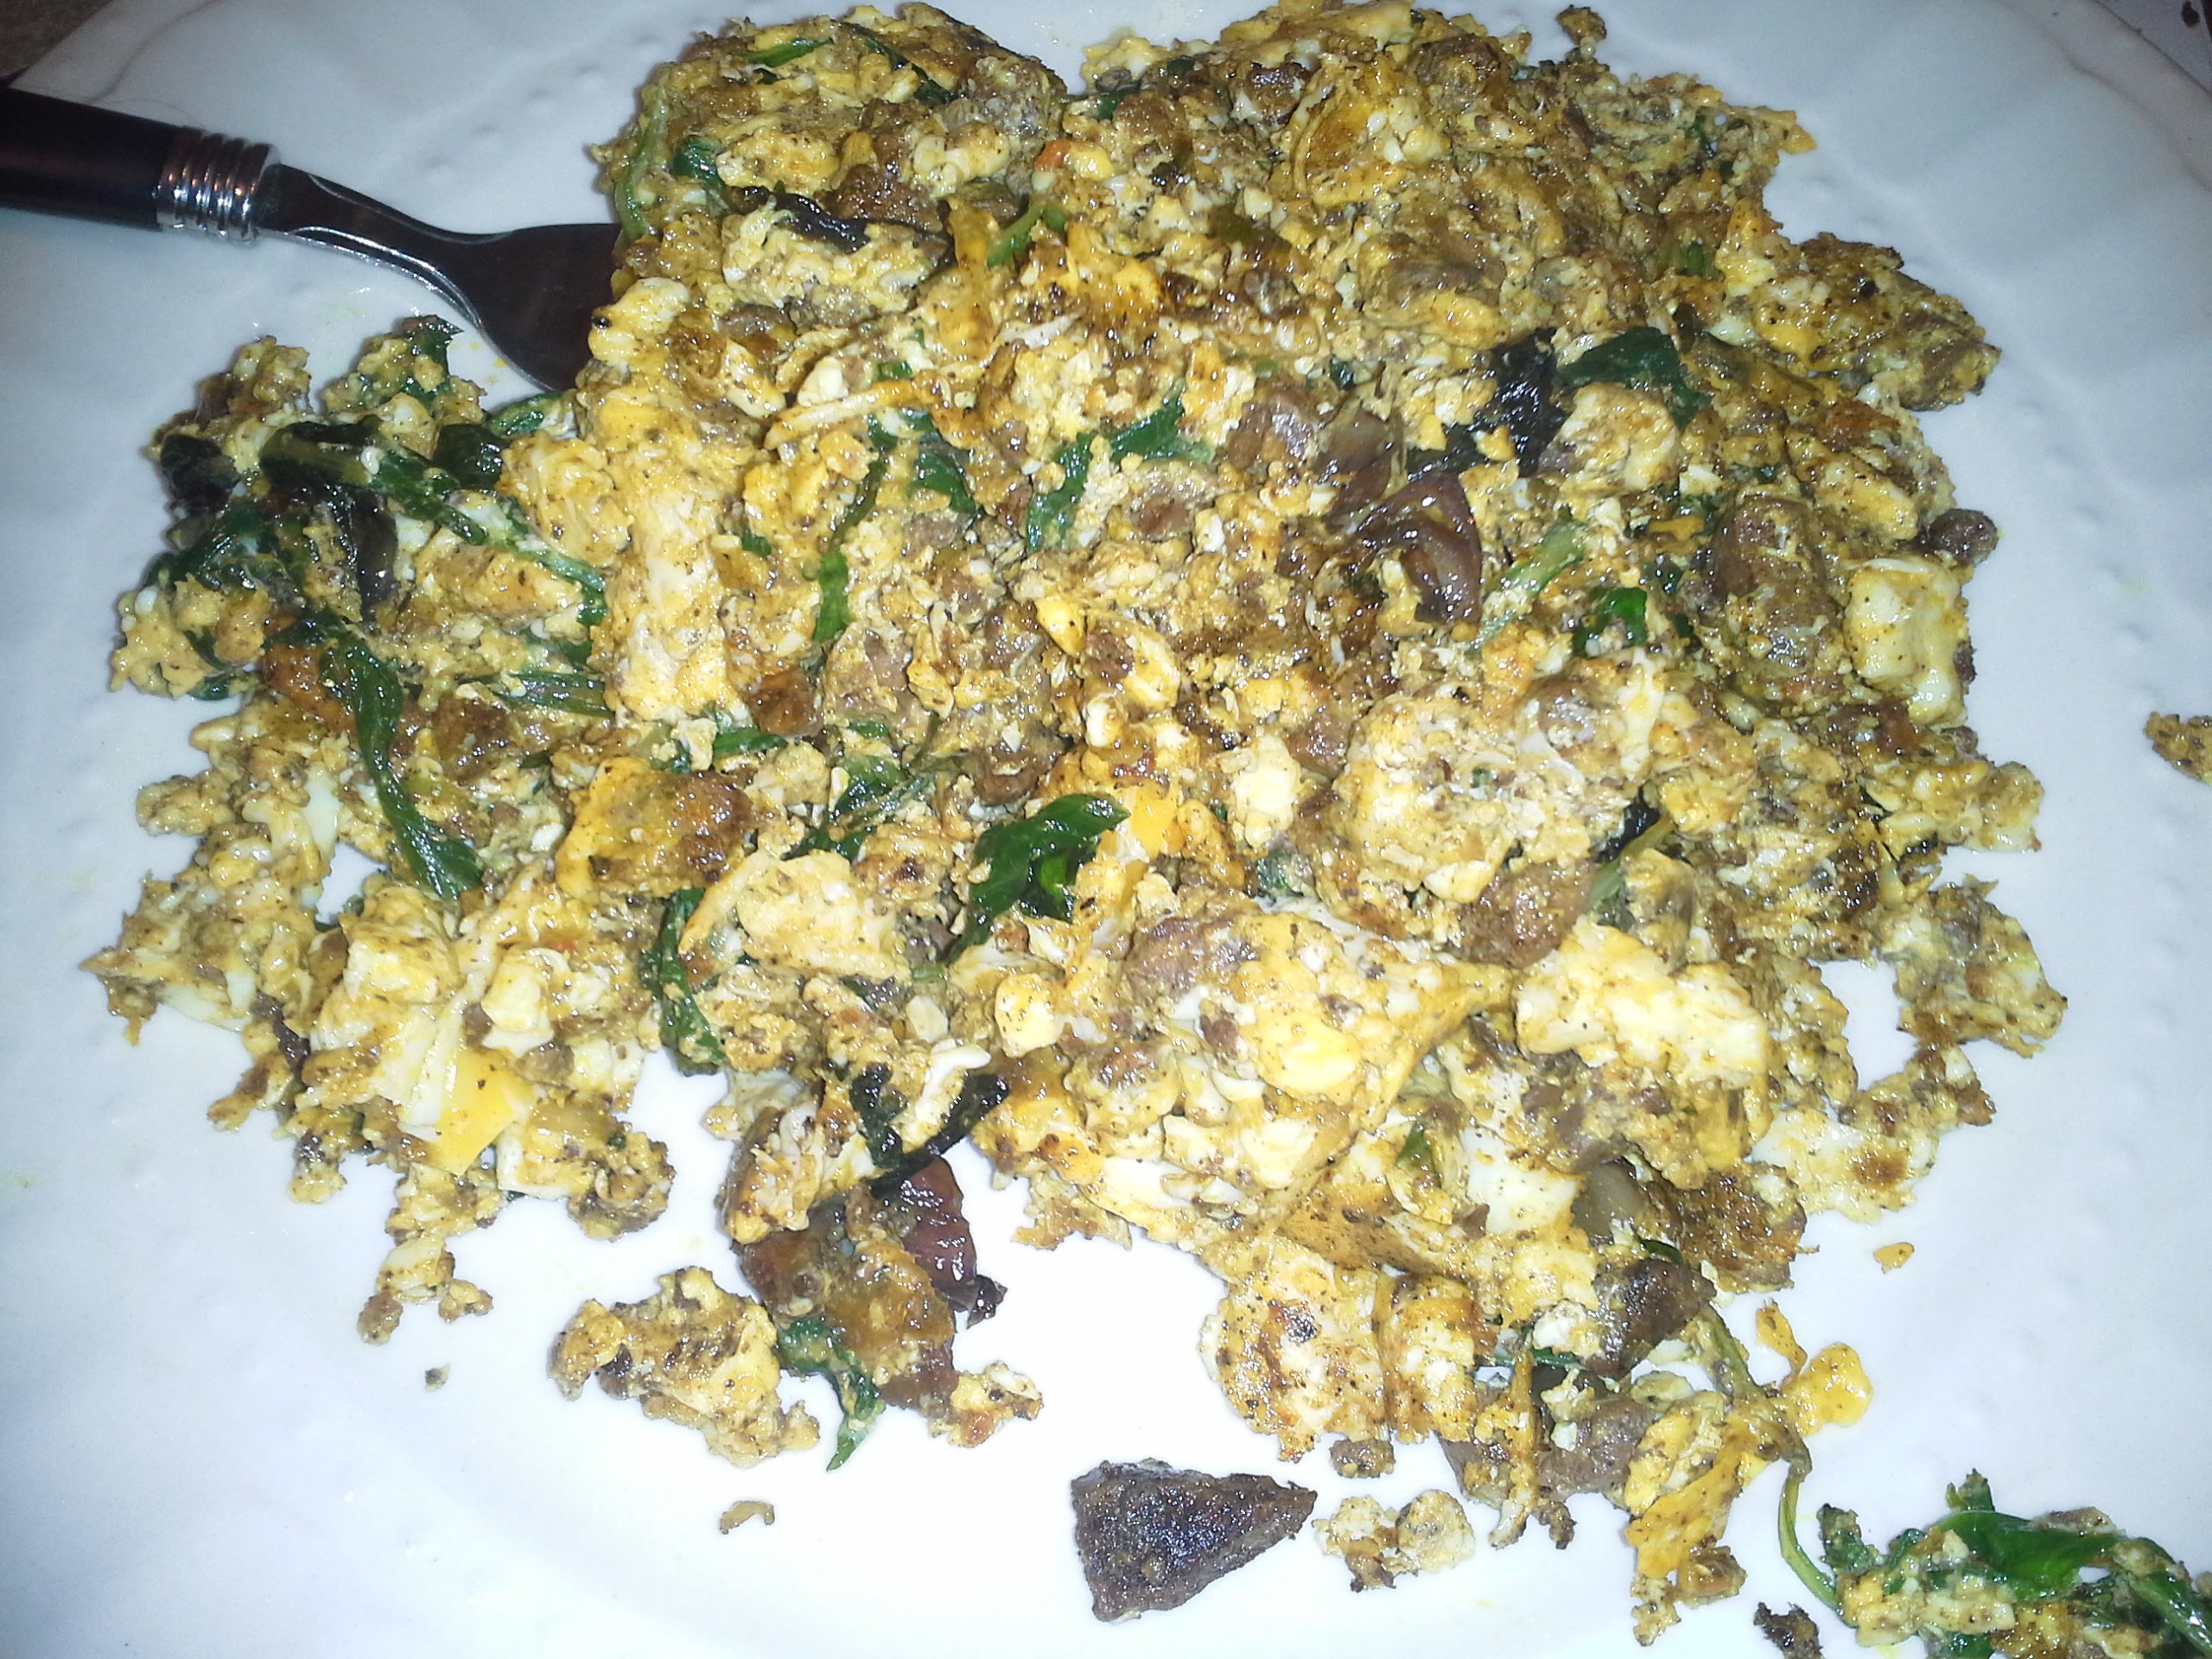 Dinner: 11:55 p.m. | 4 eggs, 2 chicken livers, greens mix, 2 Tbsp. red palm oil, herbs & spices